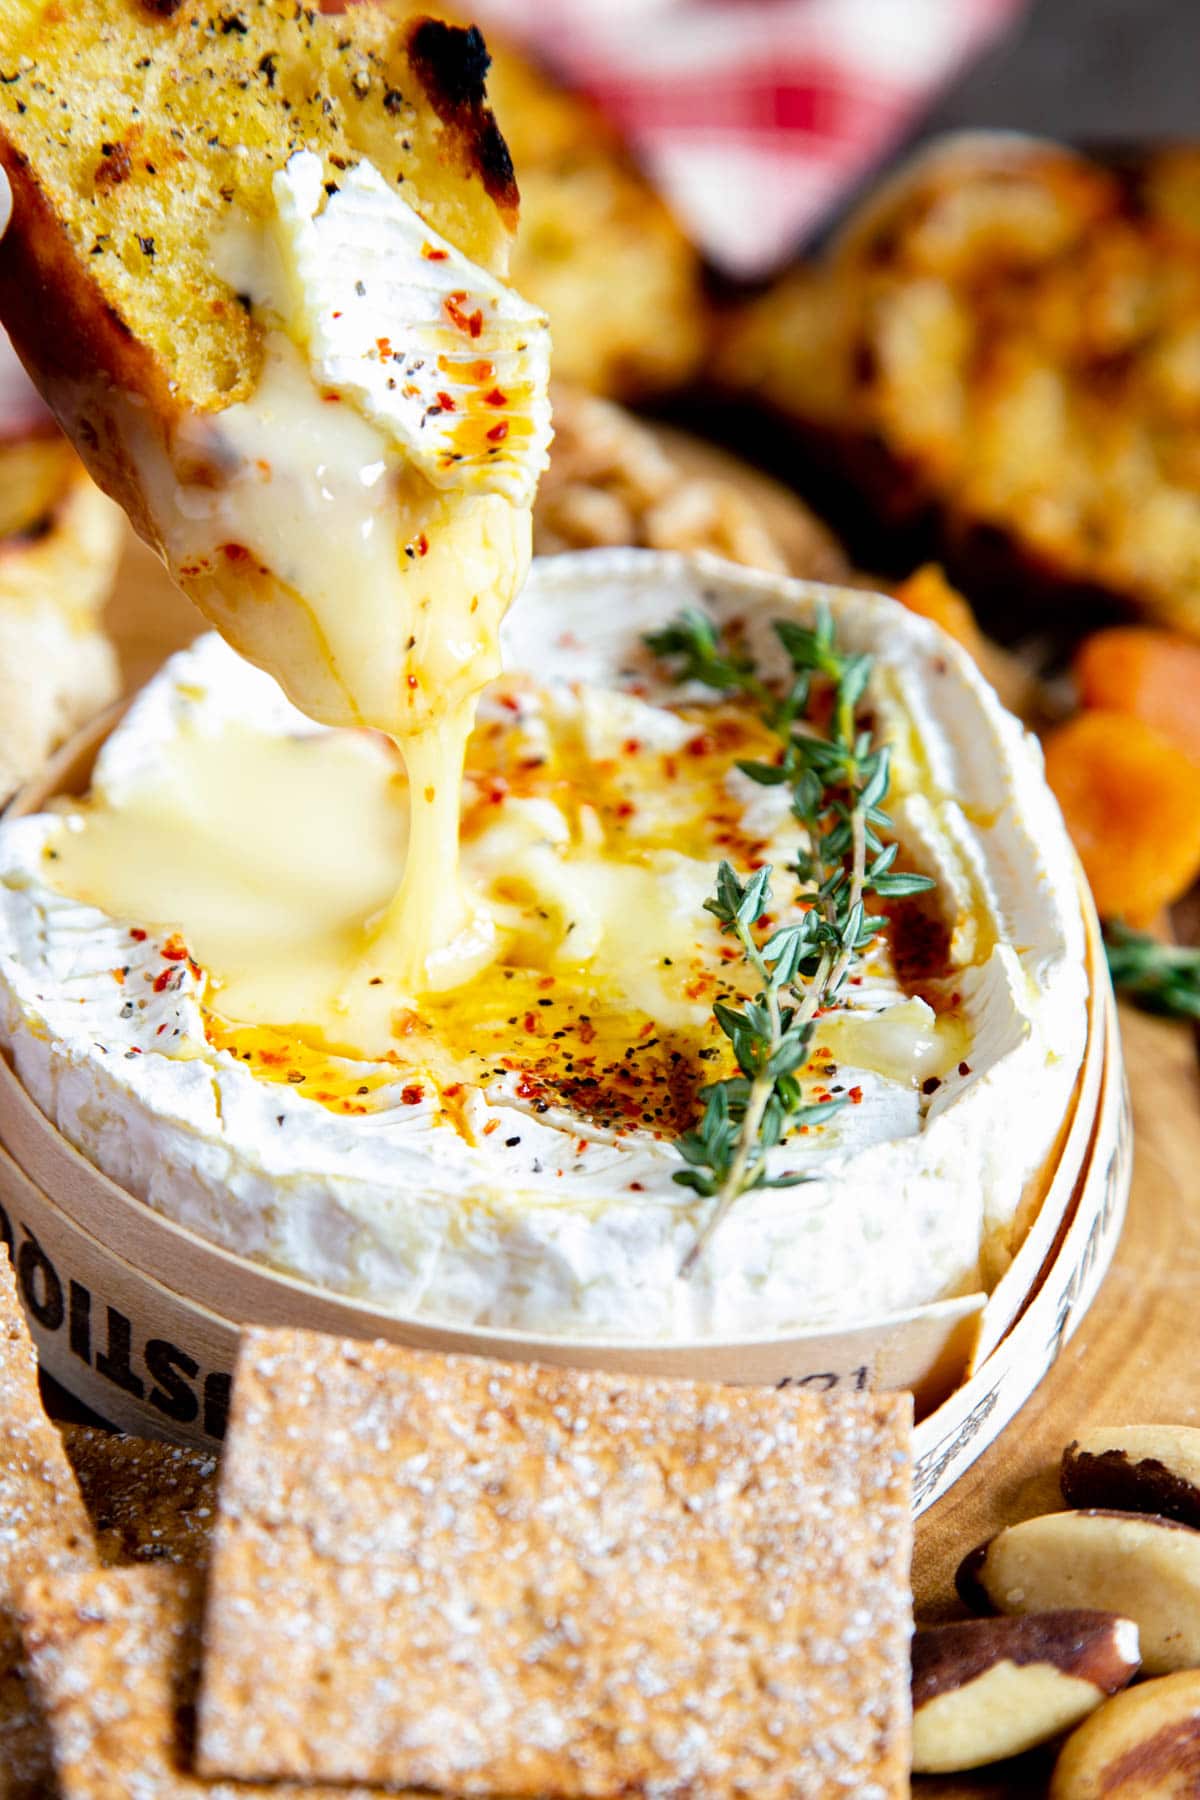 Gooey delicious camembert drips from a toasted slice of baguette. The tasty runny cheese is garnished with a sprig of thyme.